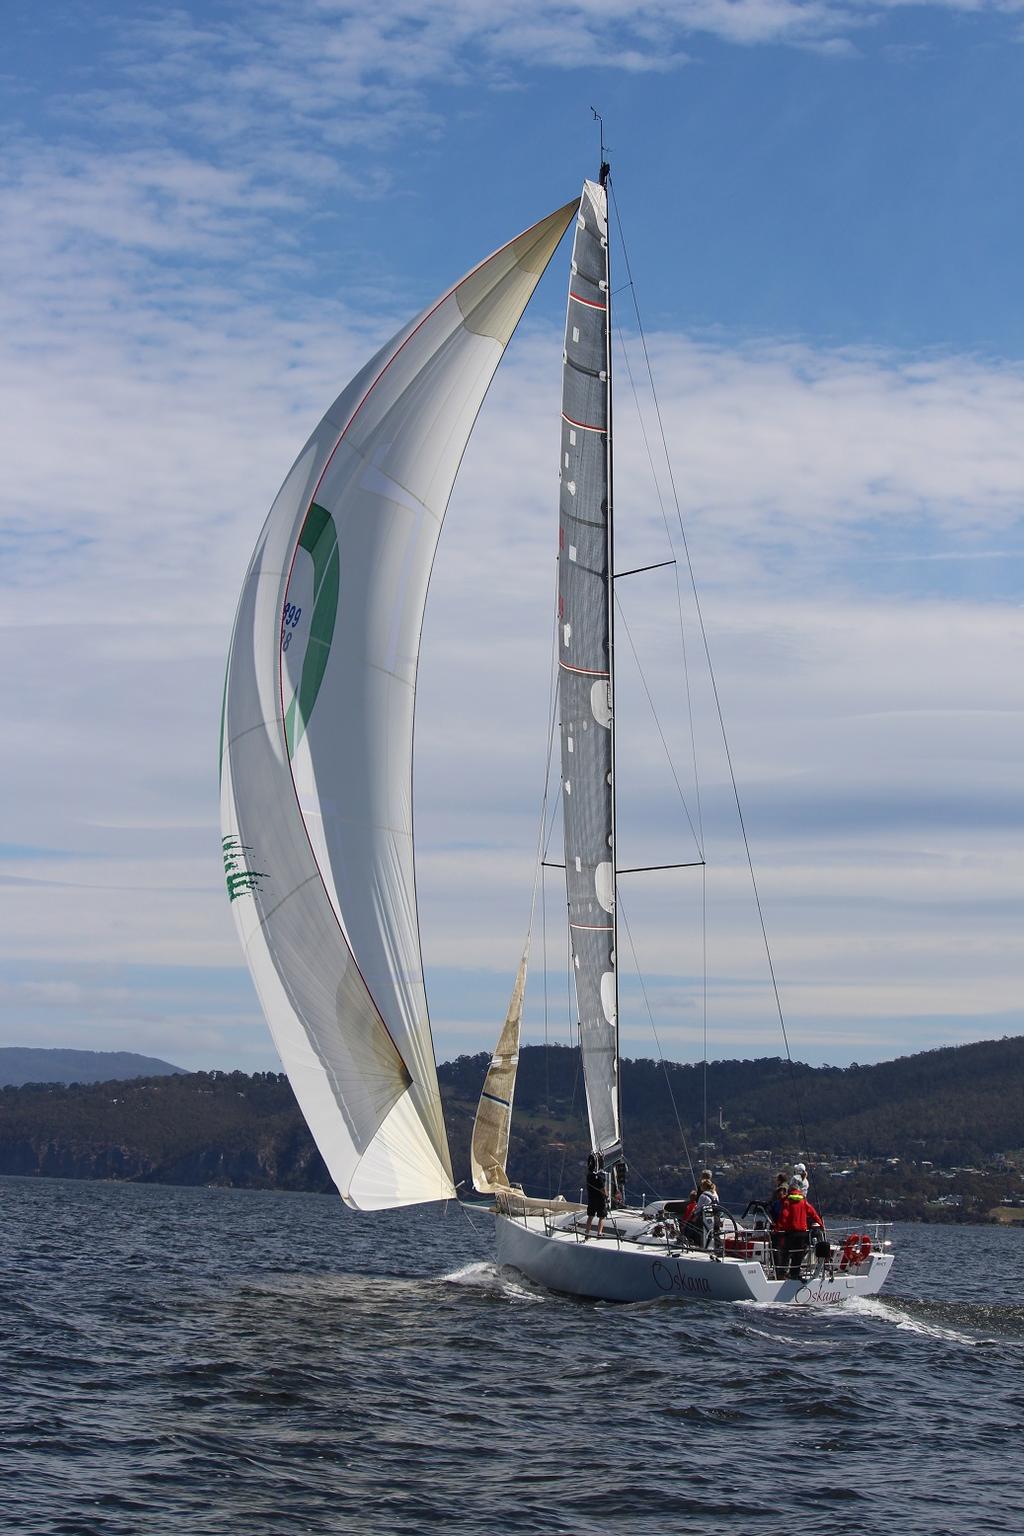 The Cookson 50 Oskana, a Tasmanian entry for the Rolex Sydney Hobart,  had a luckless day, becalmed down the river and losing he big lead. © Peter Watson